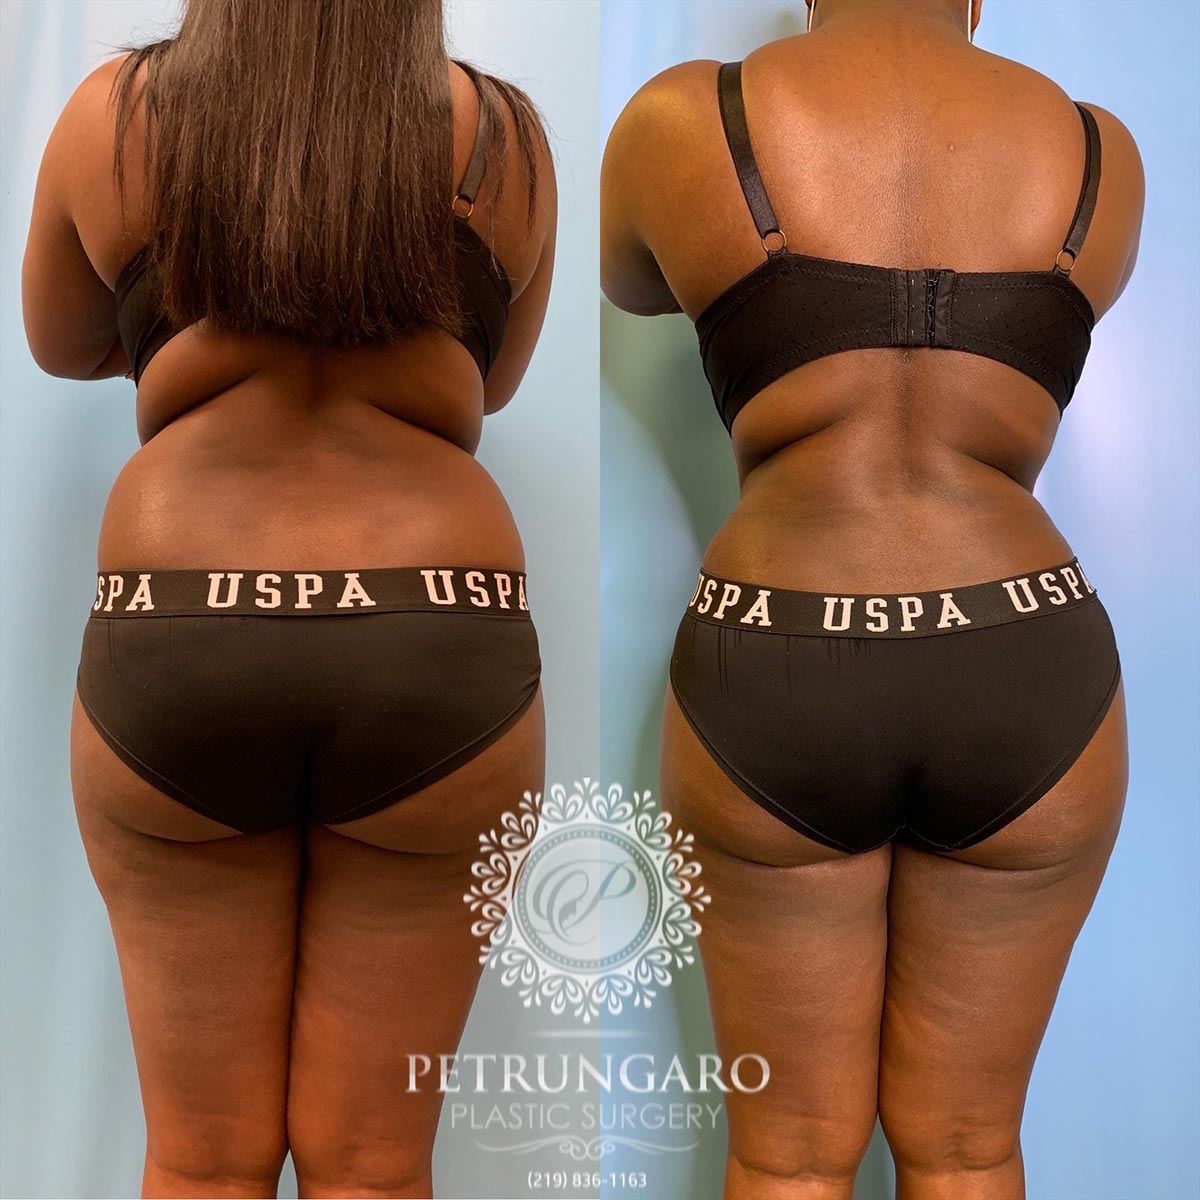 30 year old woman 3 months after tummy tuck with Lipo 360-6